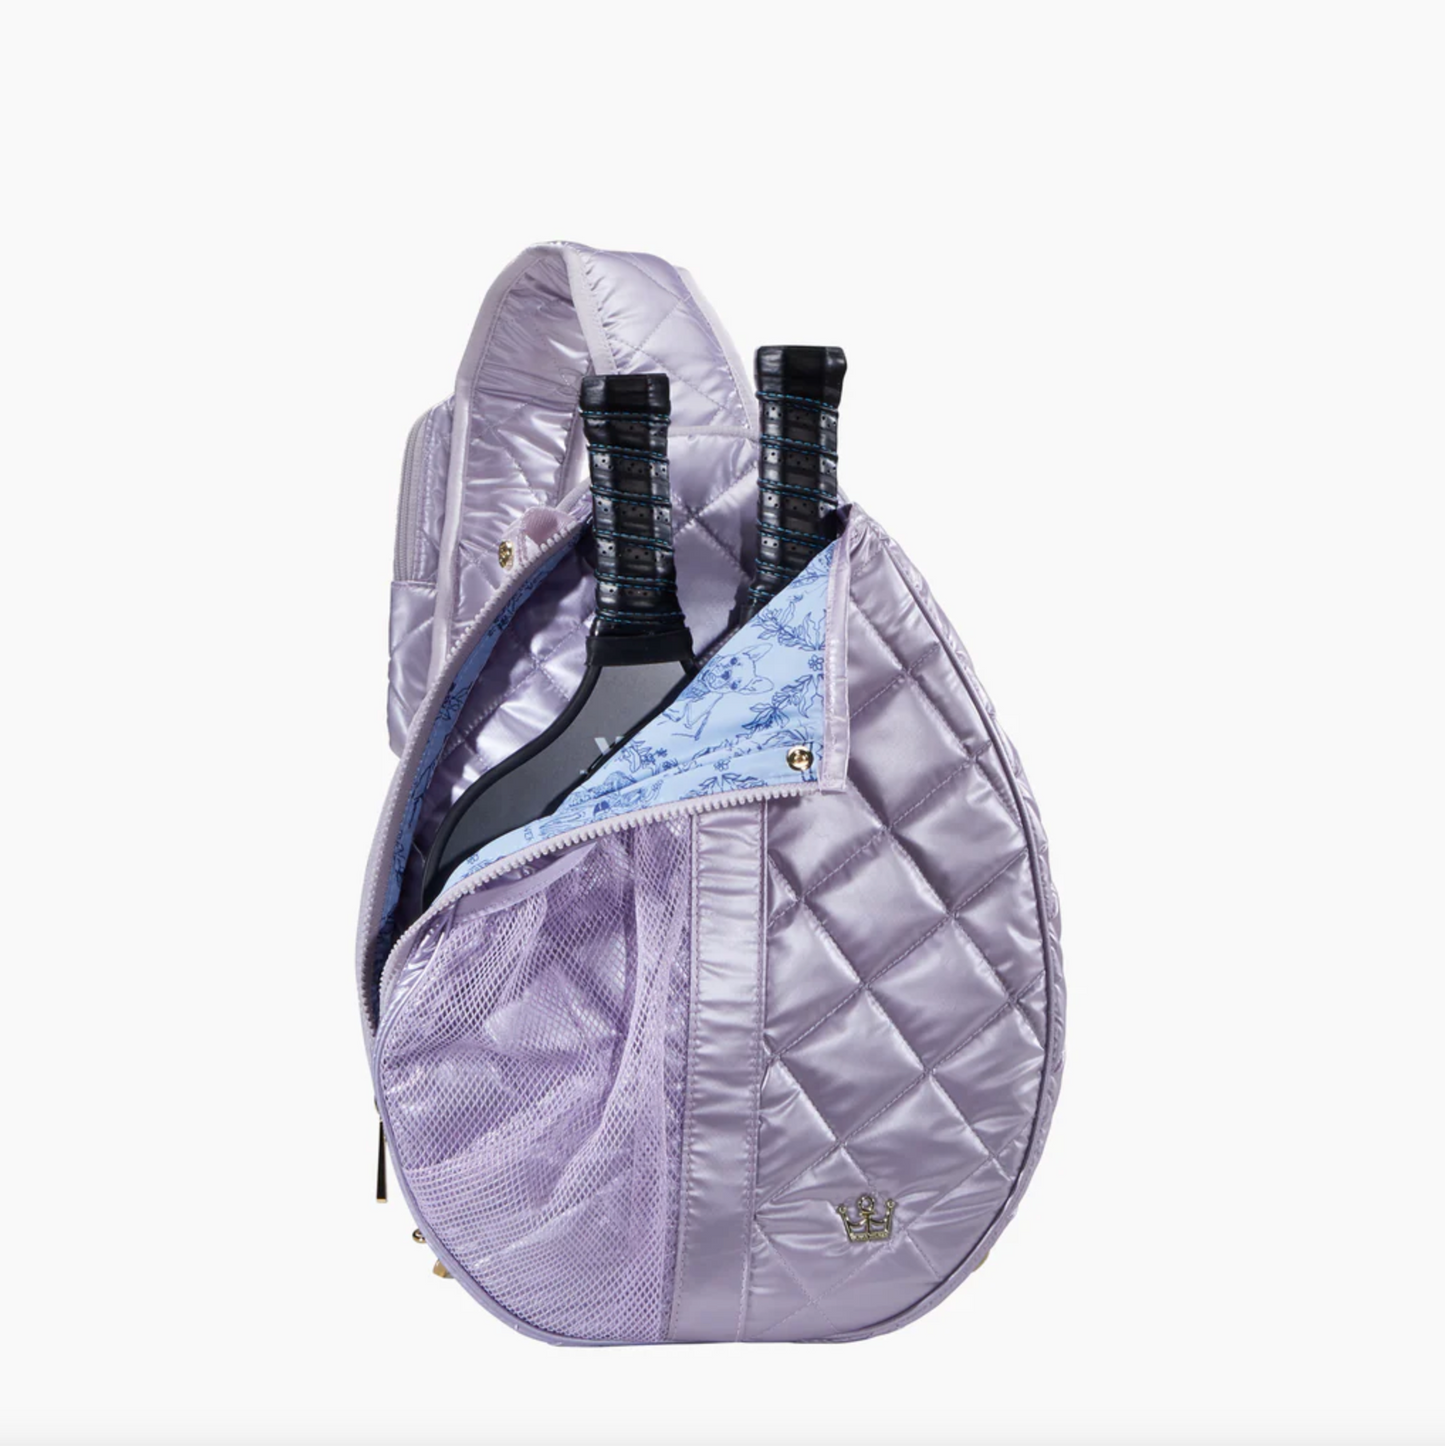 Oliver Thomas Maxed Out Pickle/Tennis Sling Backpacks in Lavender Metallic at Wrapsody